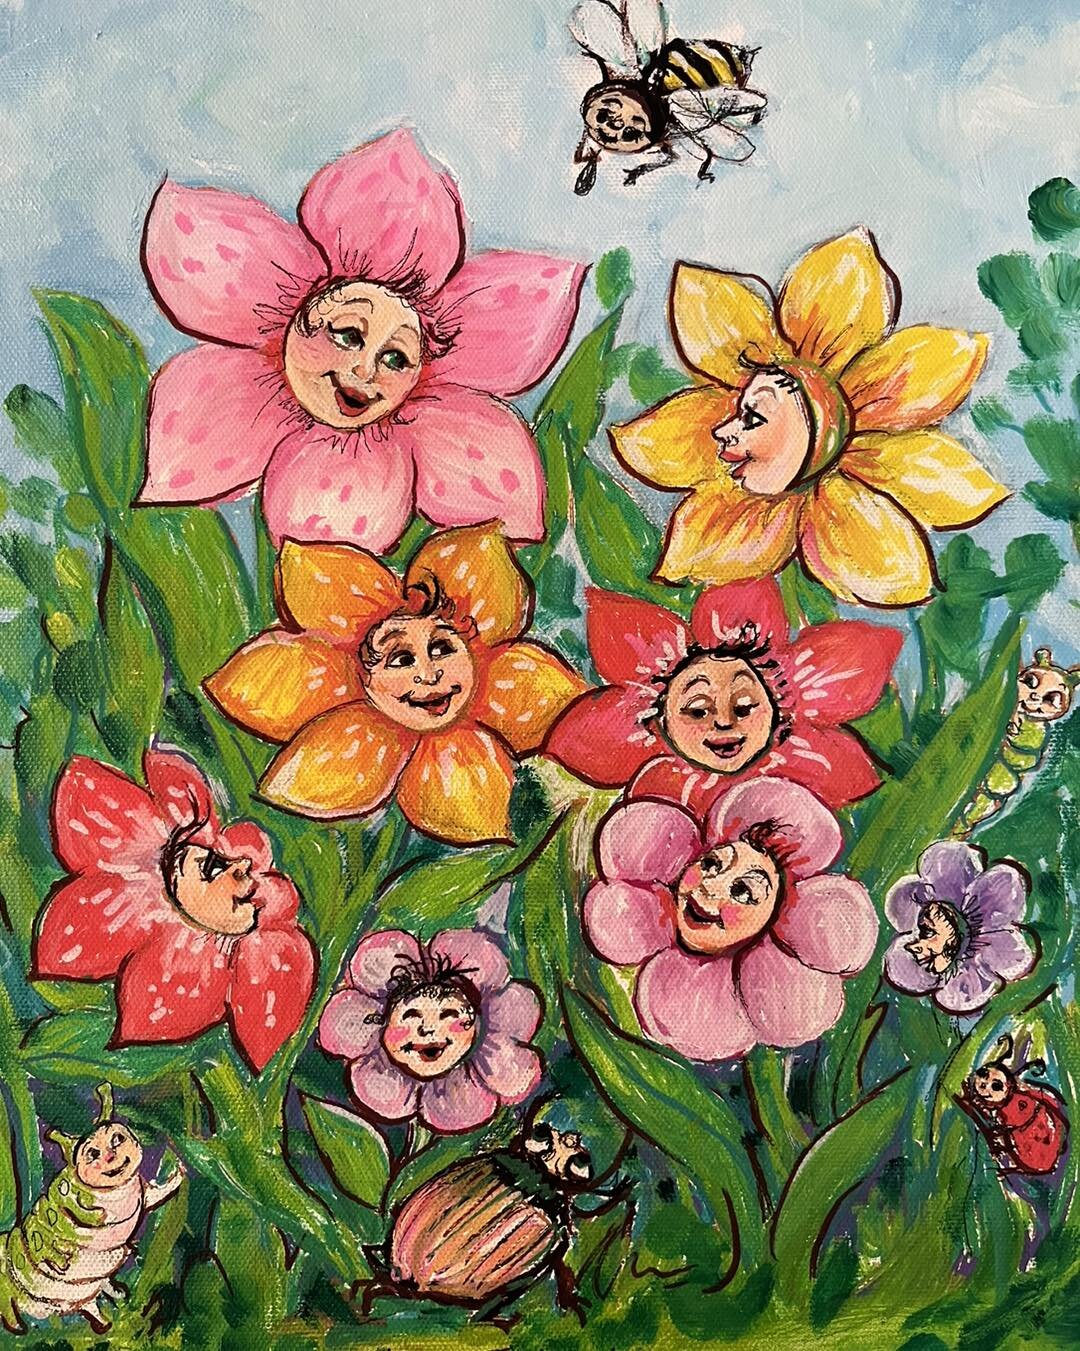 Here come those Flowers in May! Here&rsquo;s 2 small paintings
&ldquo;Gossiping Flowers were overheard by Betty Bumblebee &ldquo; 11 by 14 in gallery wrapped canvas) and&ldquo; The Floral Chorus sing a Summer Song&rdquo;
(9 by 11 inch gallery wrapped